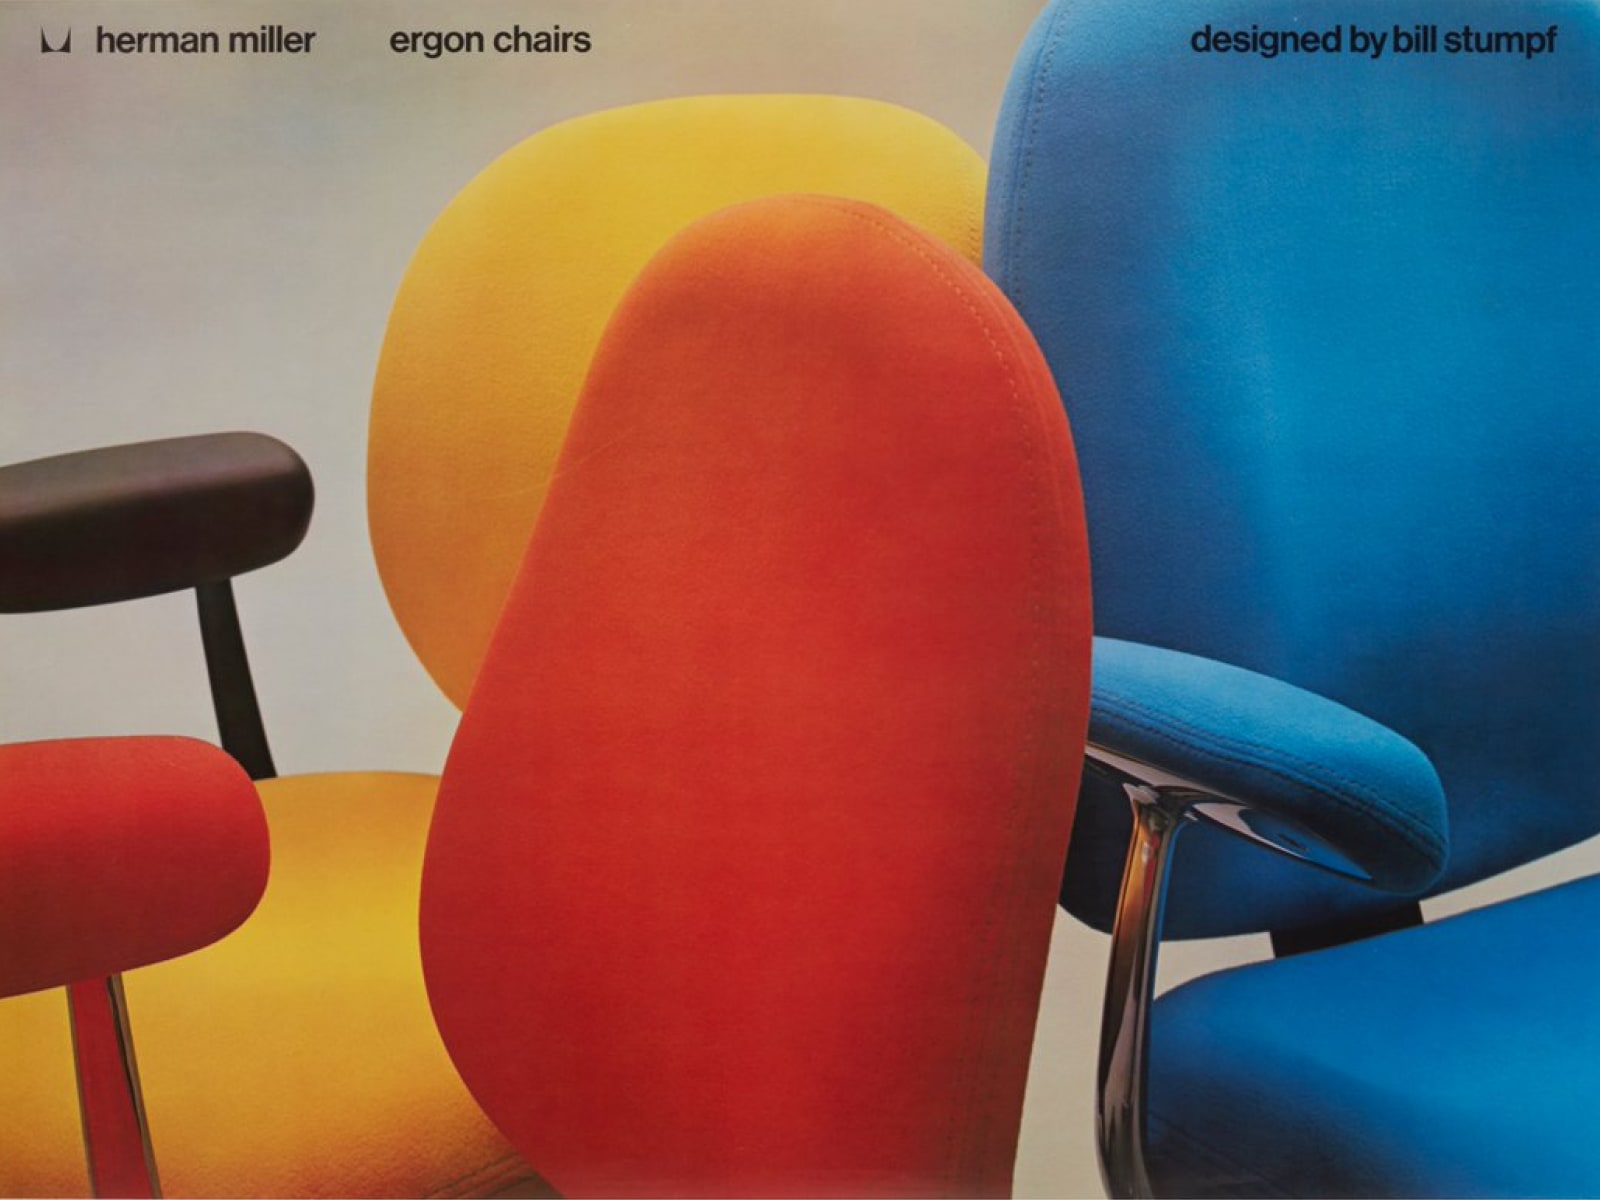 Three Ergon Chairs shown in red, yellow and blue.